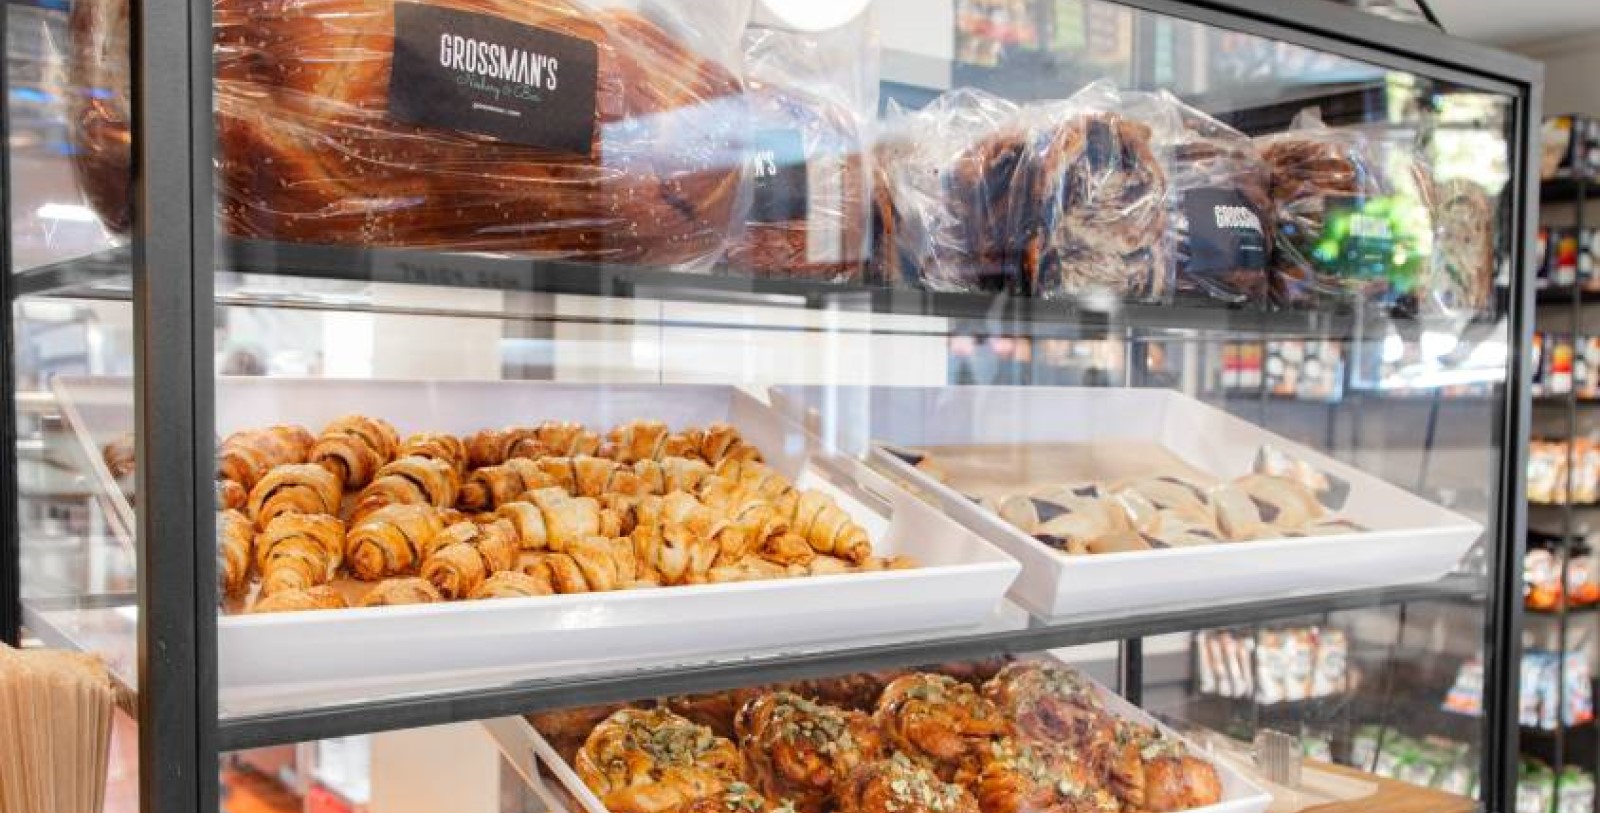 Taste the delicious bagels and savory sandwiches at Grossman's Noshery & Bar.